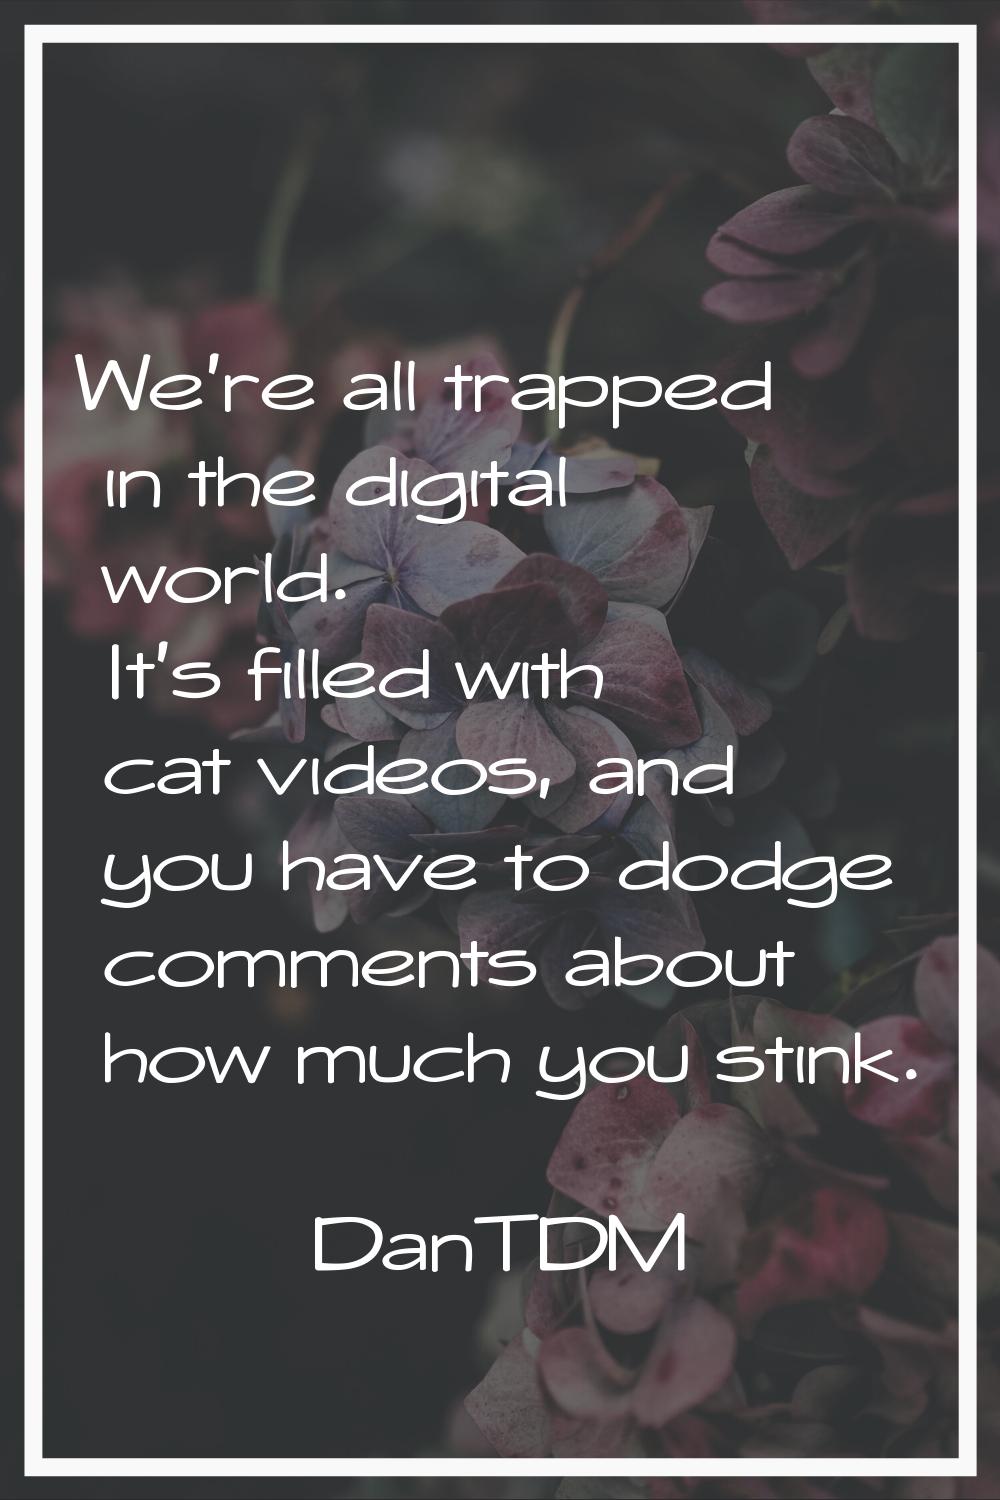 We're all trapped in the digital world. It's filled with cat videos, and you have to dodge comments